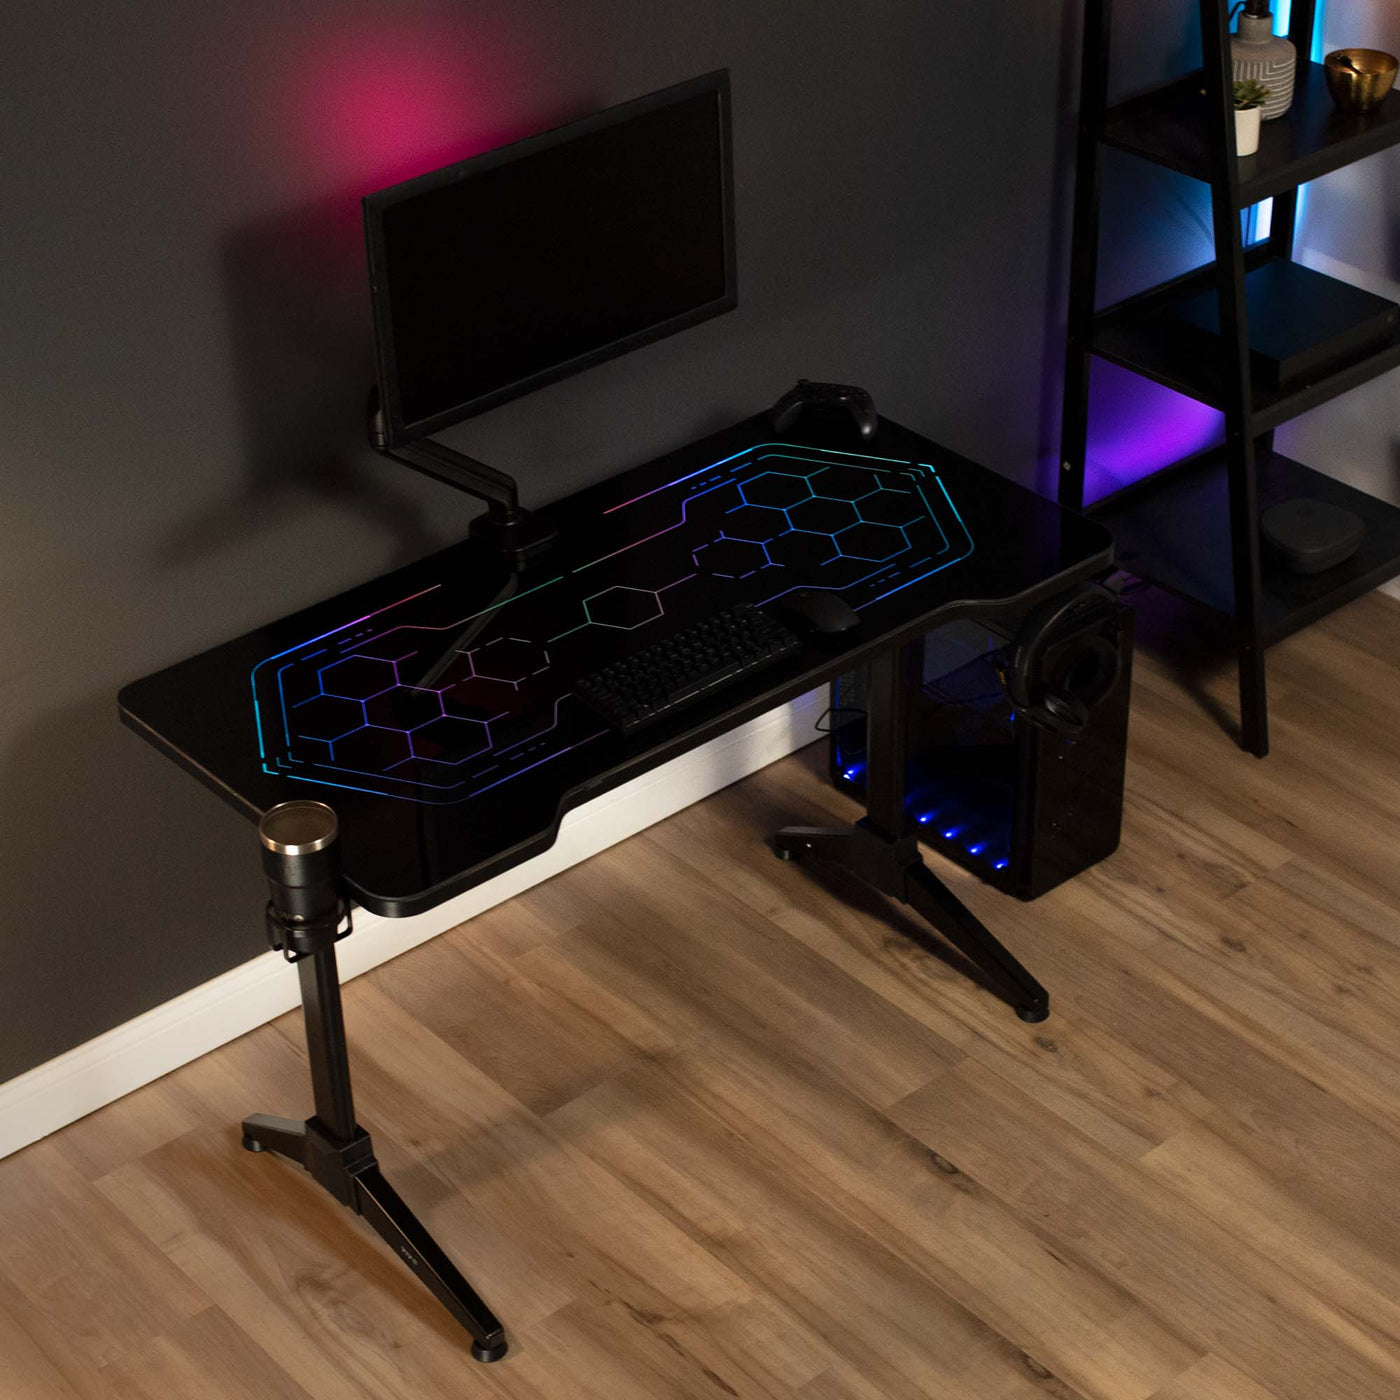 Sturdy RGB lighting gaming desk with color changing remote controlled LED lights under tempered glass tabletop surface.